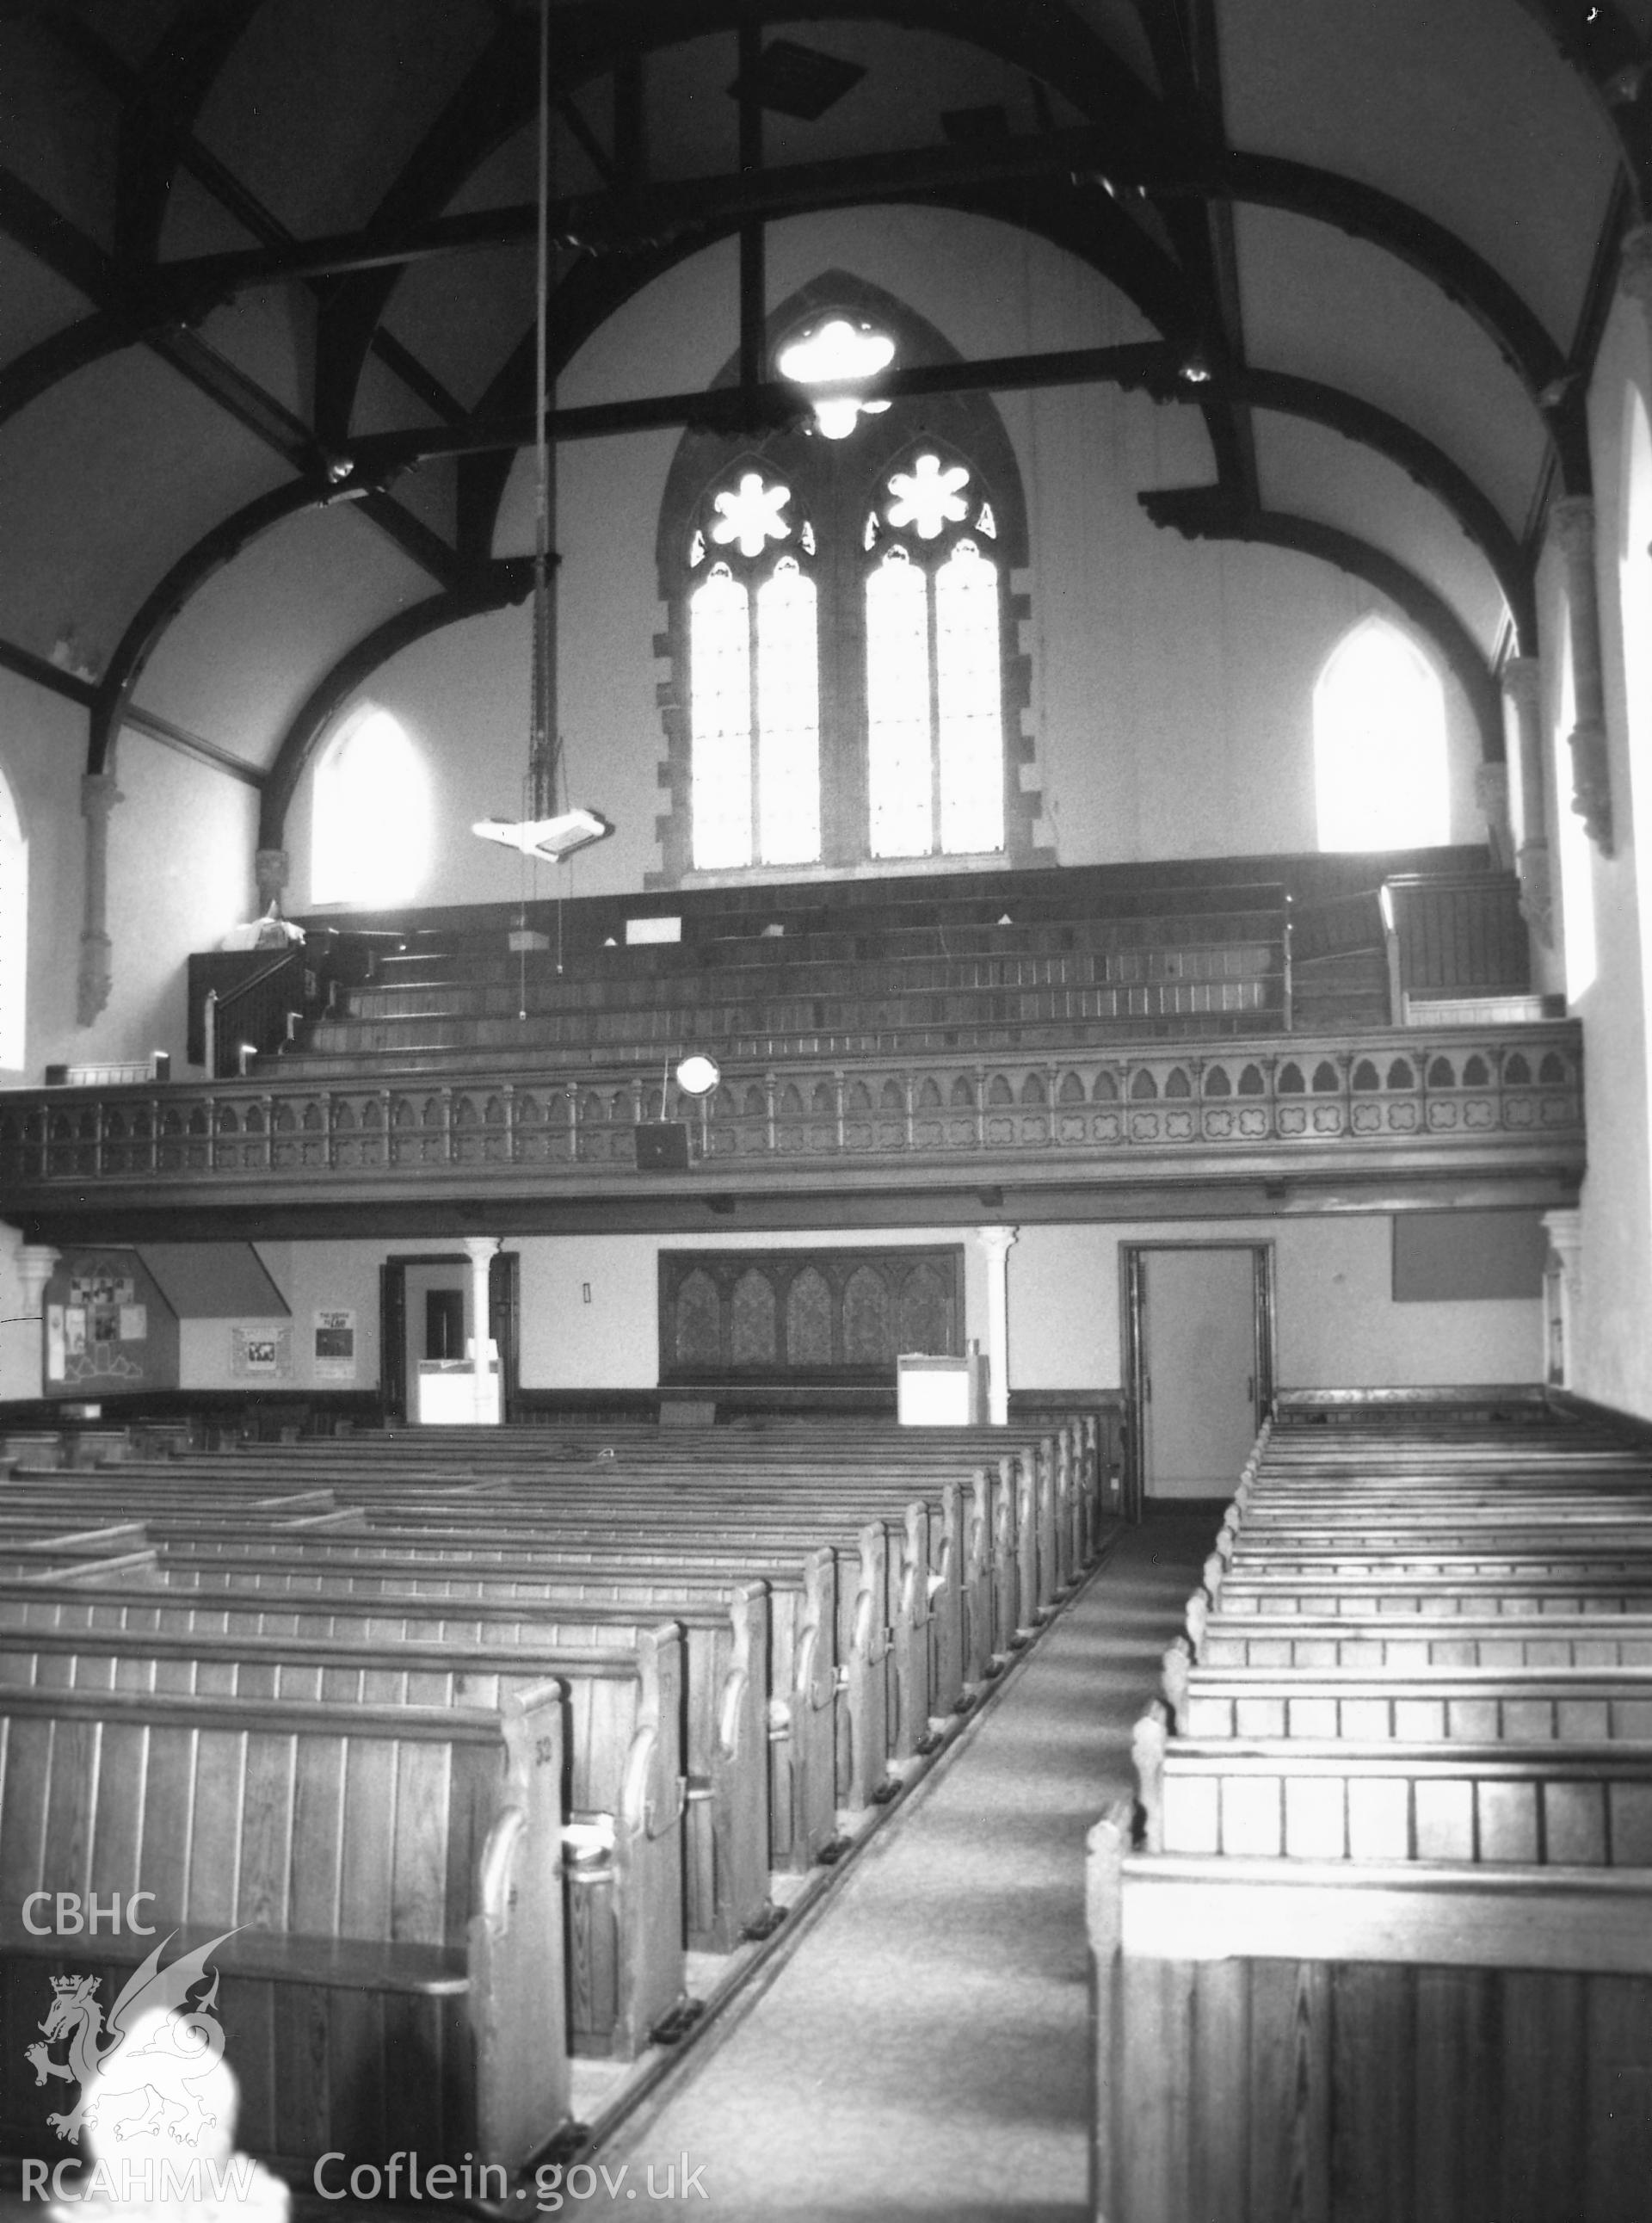 Digital copy of a black and white photograph showing an interior view of Deer Park  Baptist Chapel, Tenby,  taken by Robert Scourfield, 1995.